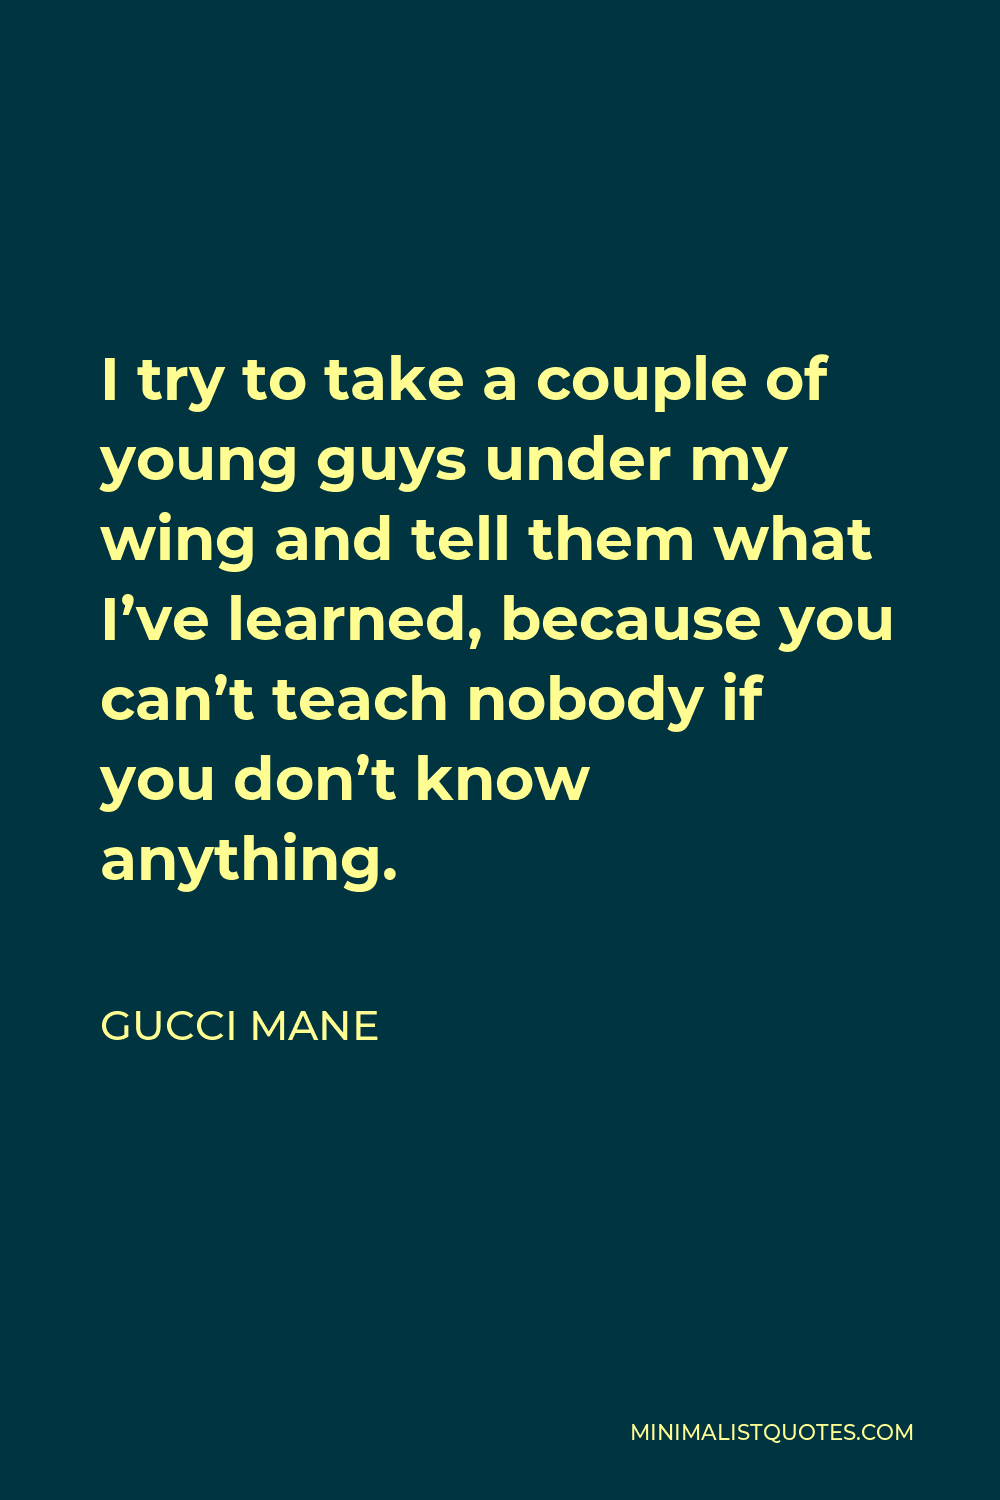 Gucci Mane Quote - I try to take a couple of young guys under my wing and tell them what I’ve learned, because you can’t teach nobody if you don’t know anything.